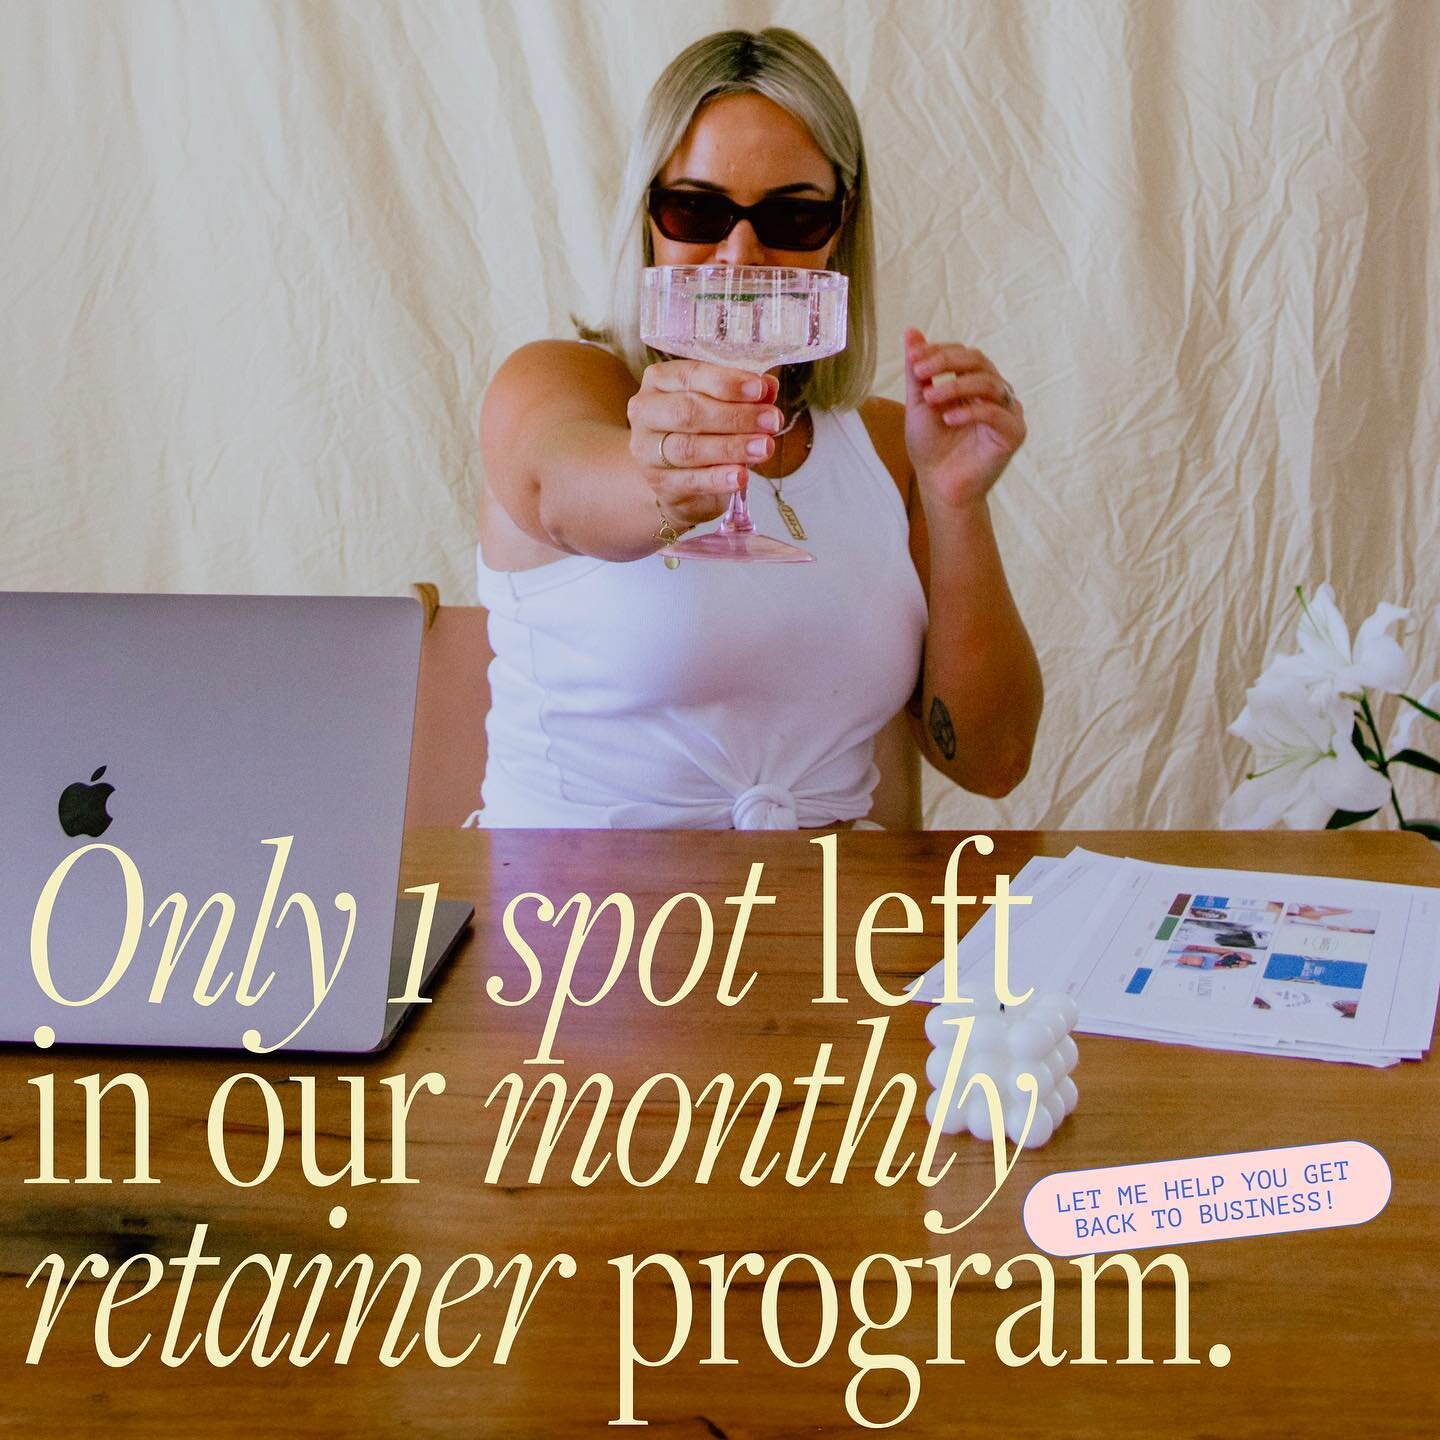 We&rsquo;ve had a lot of questions lately in regards to our &lsquo;Laid Back&rsquo; Monthly Retainer Program. We don&rsquo;t open our books often, but we&rsquo;ve got one spot up for grabs!!!! 🚨 

Comment &lsquo;laid back&rsquo; to find out more 😎